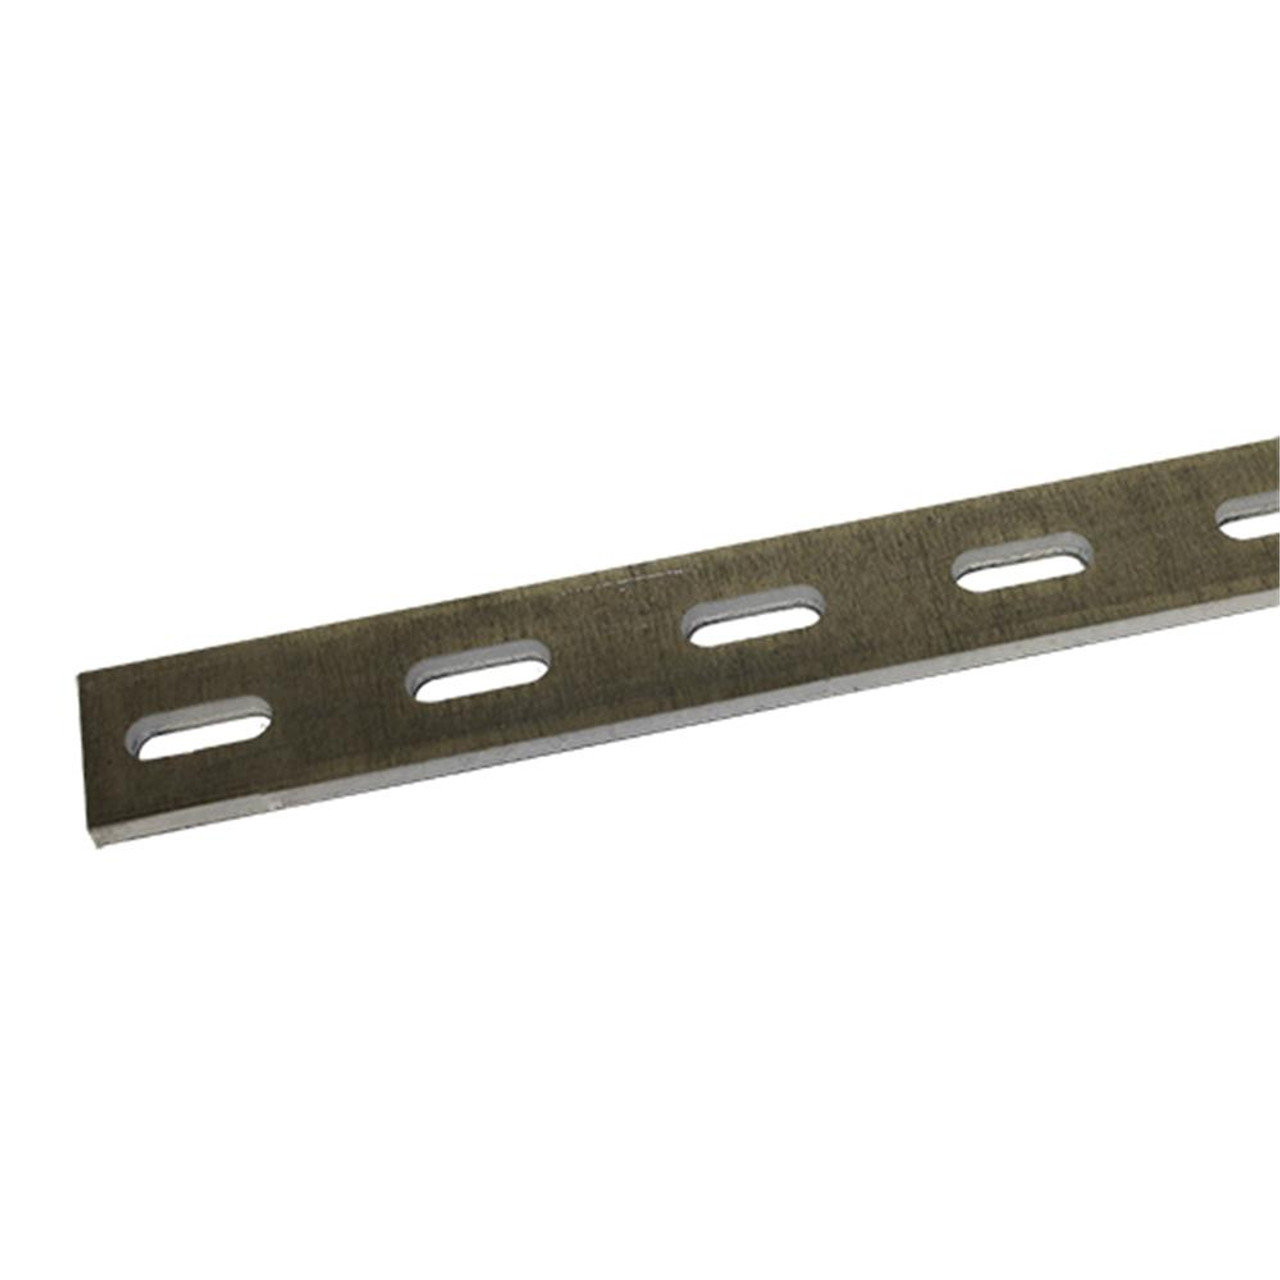 Aluminum Flat Strap with Holes